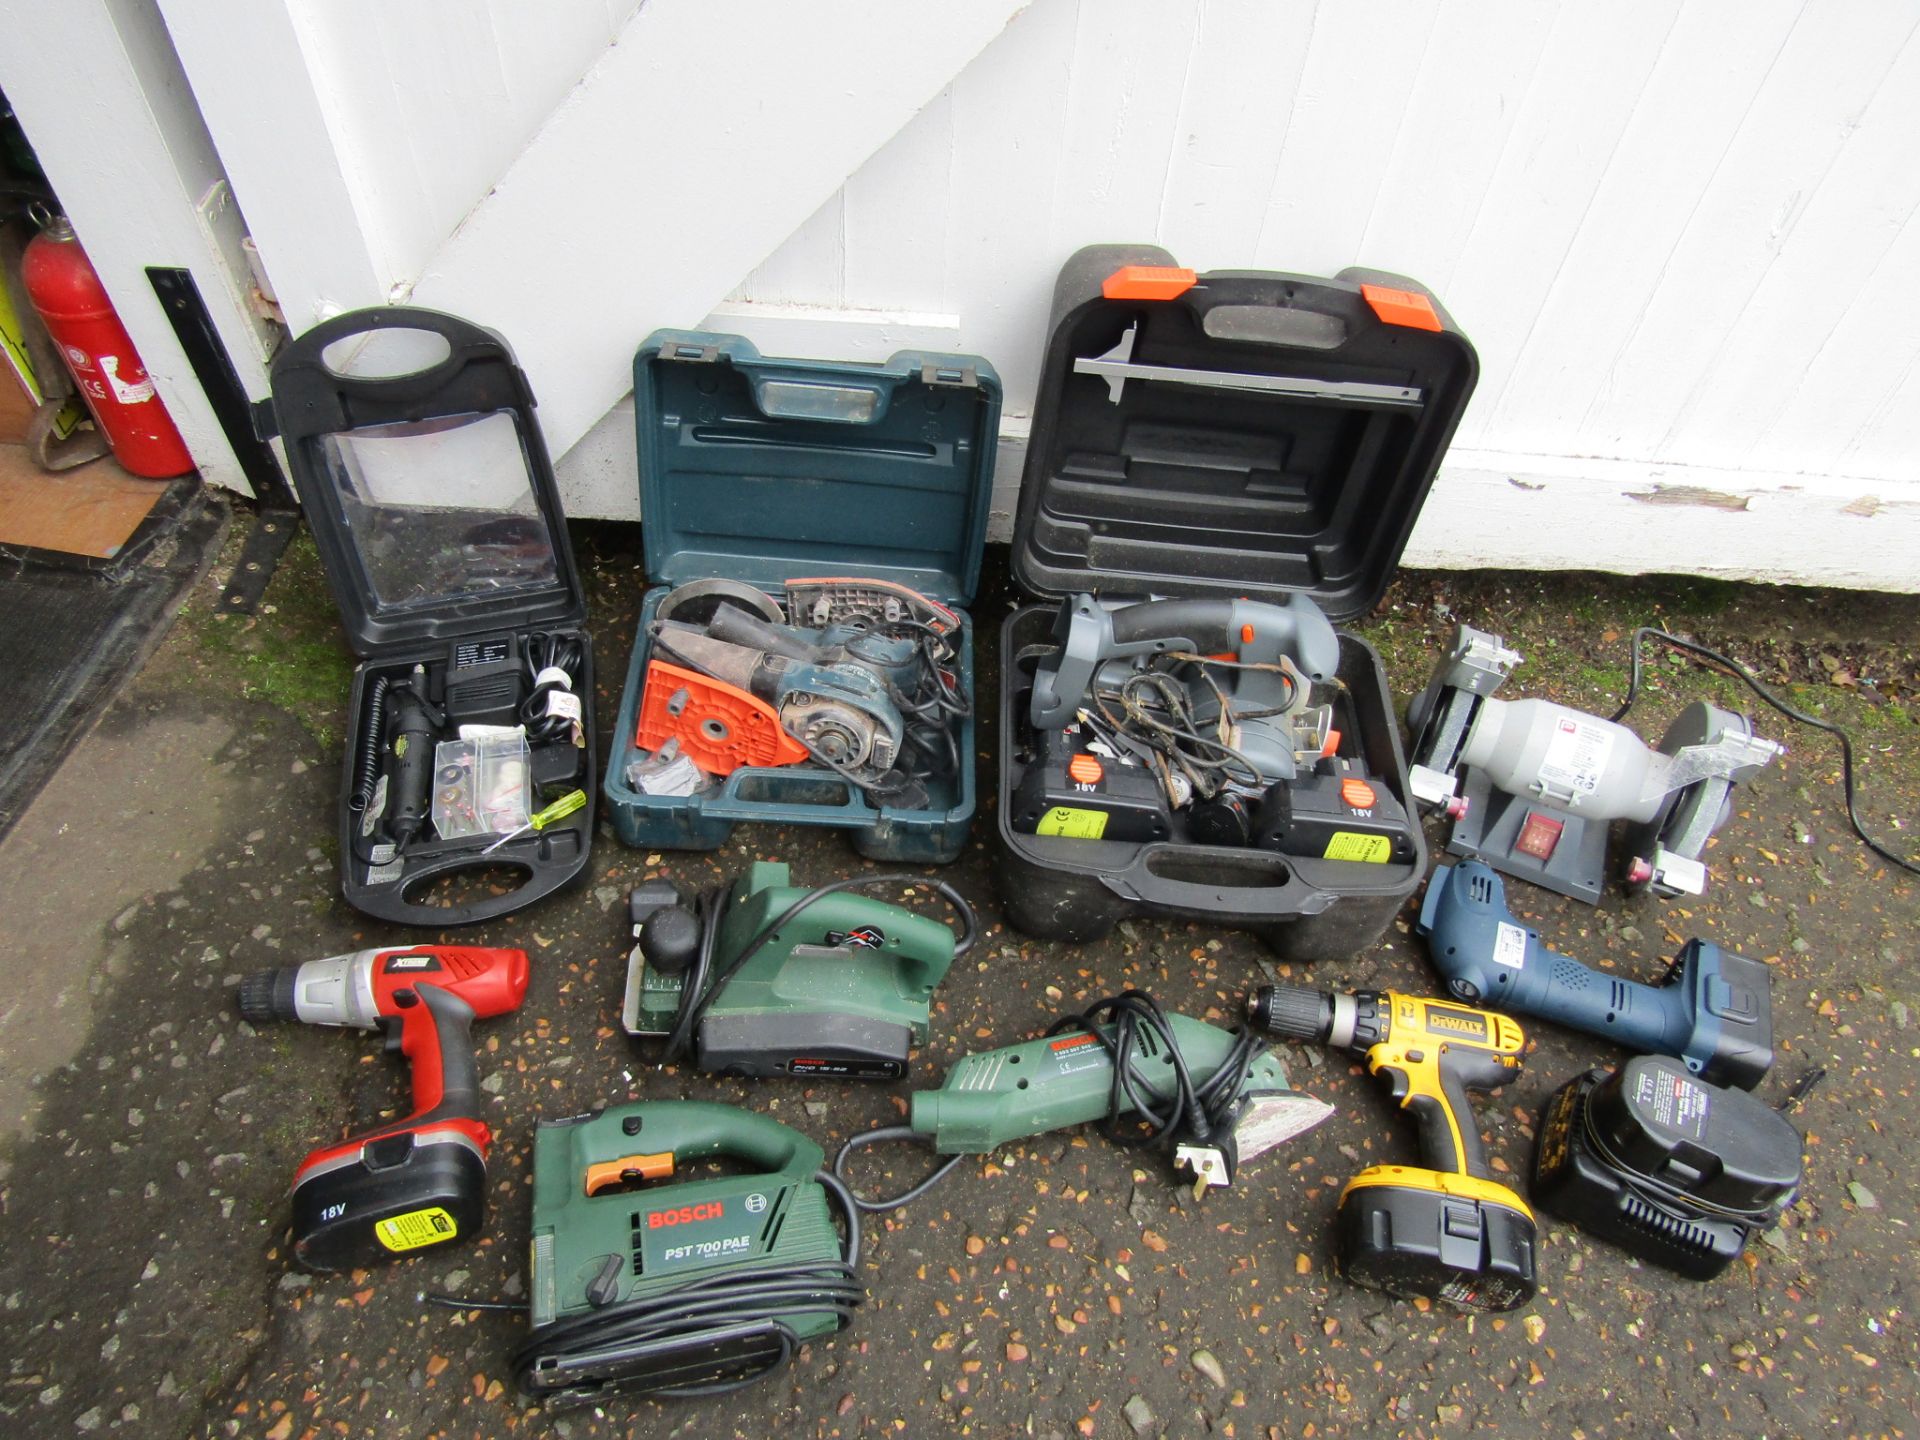 Power tools to include DeWalt and Bosch etc (some have no plugs)